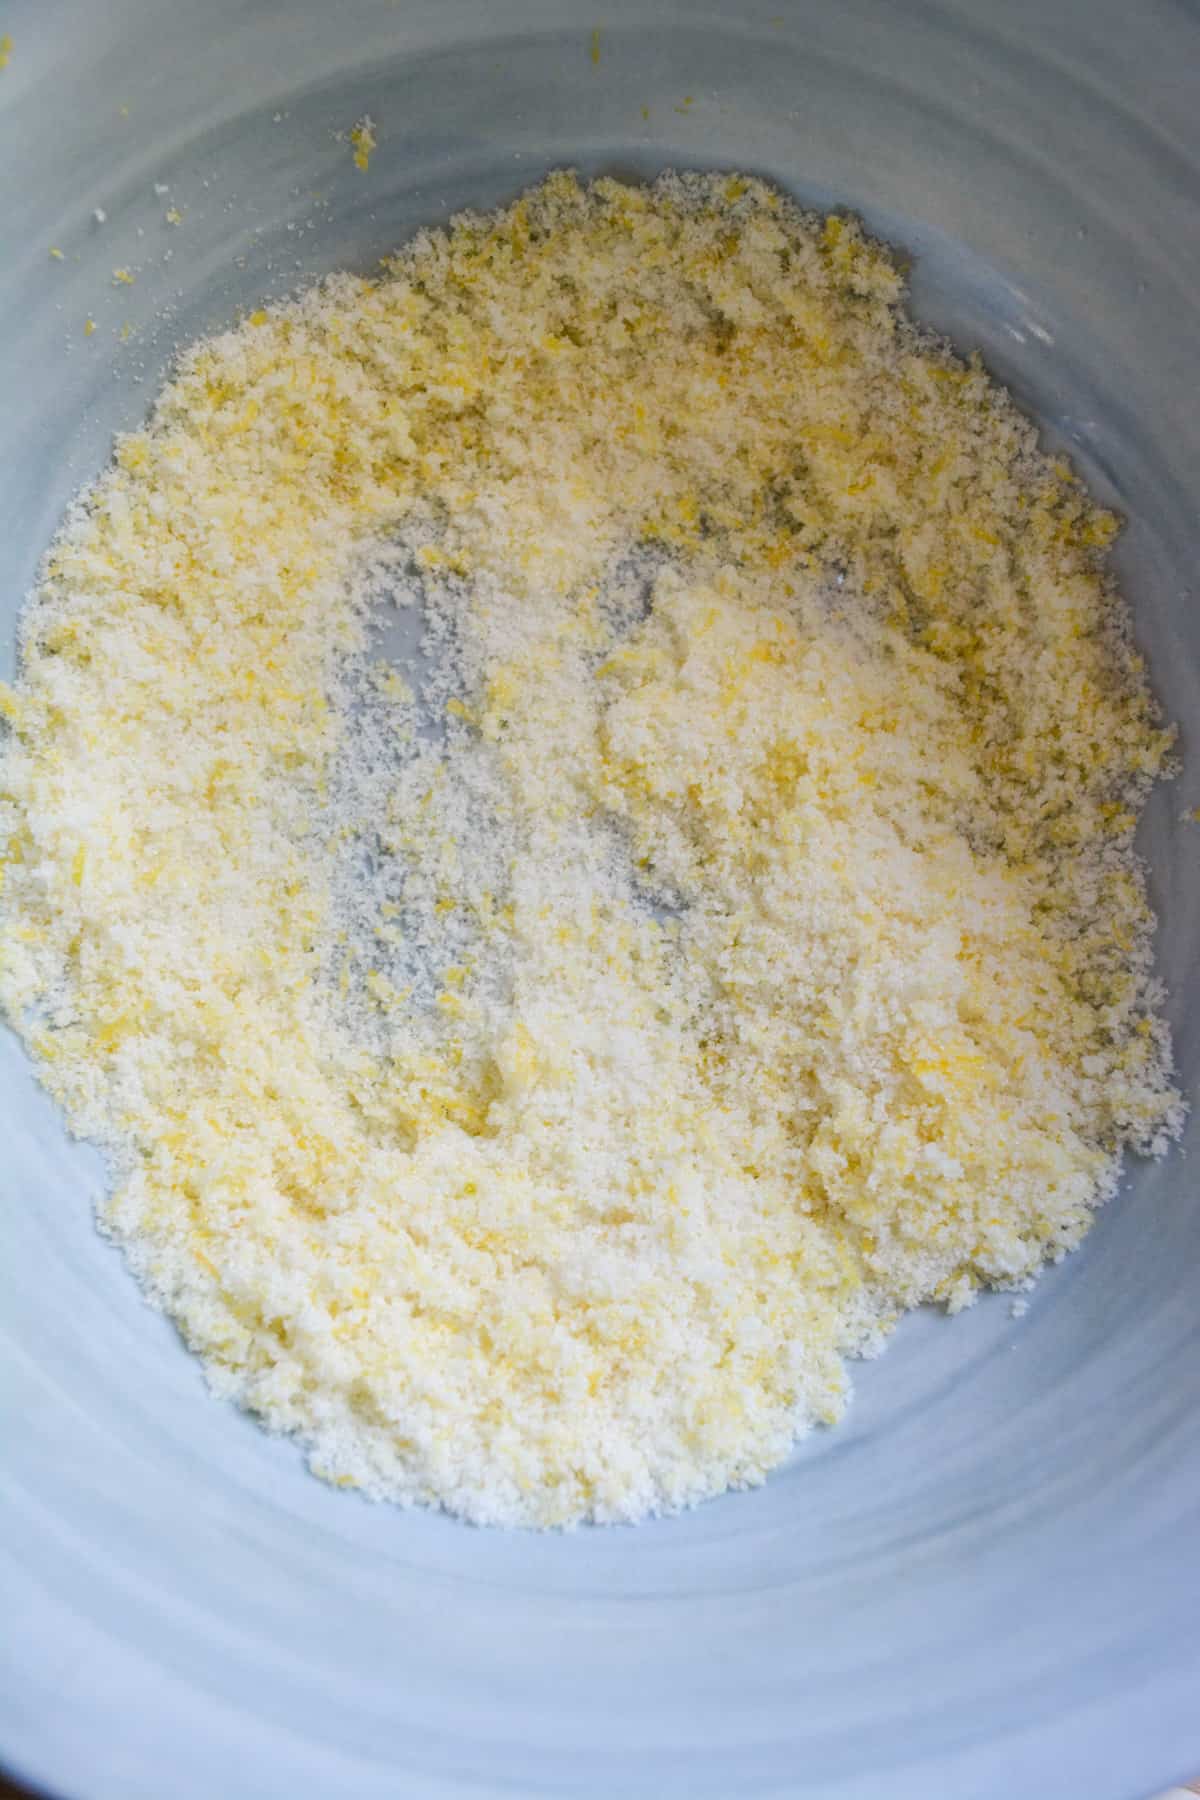 Granulated sugar and lemon zest rubbed together in a marble bowl.